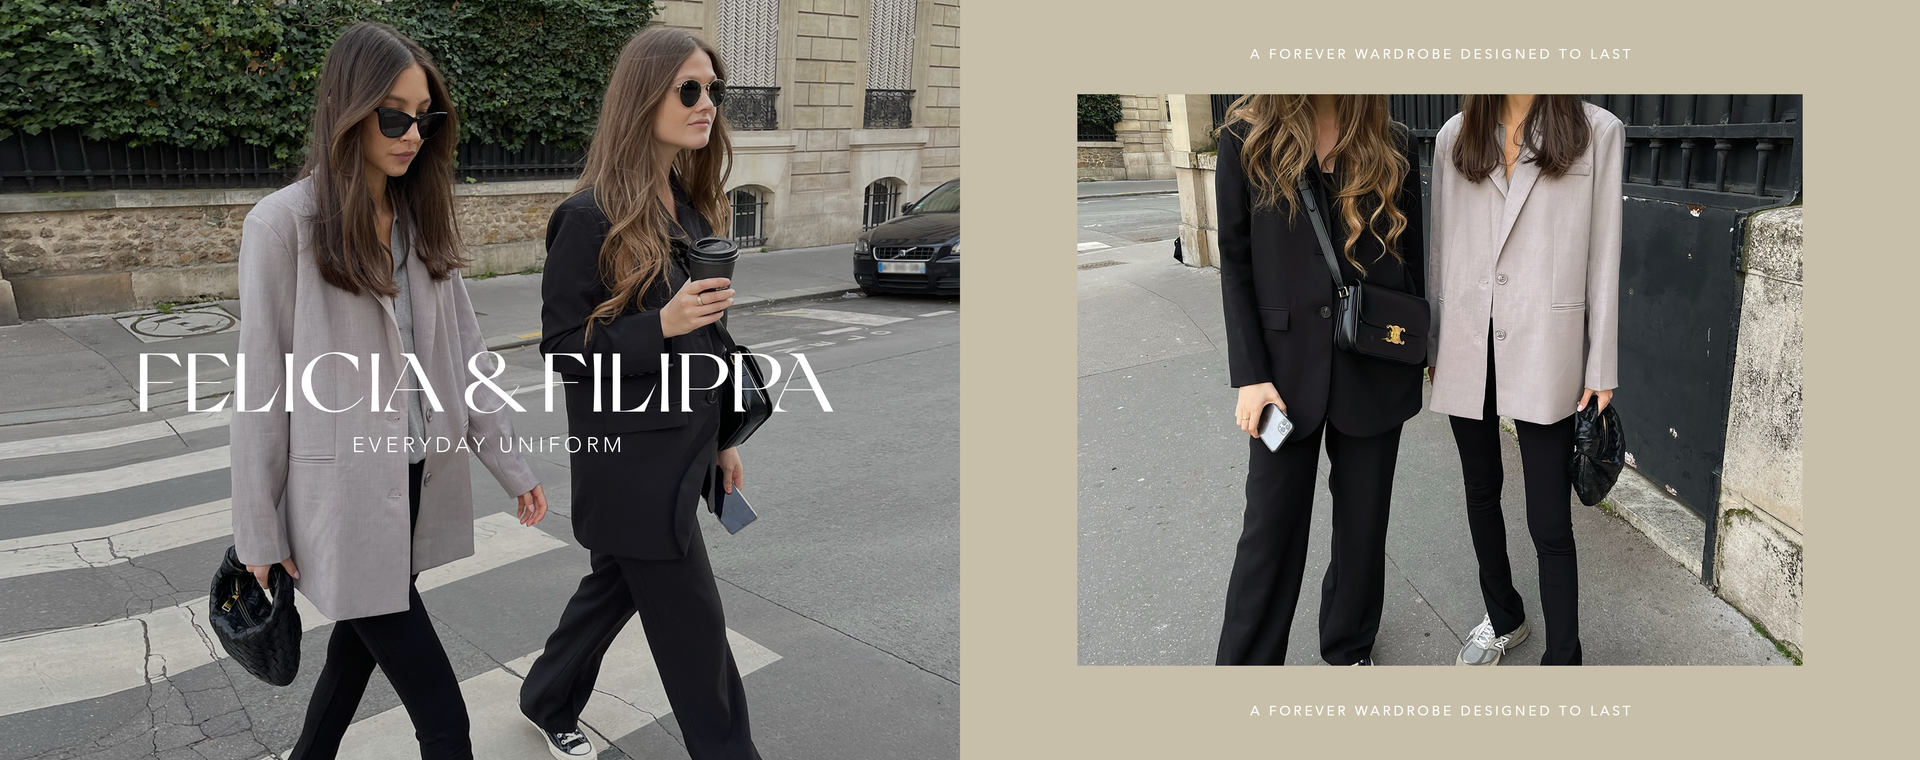 Louis Philippe unveils 'Stay Uncrushed' campaign for Permapress Collection